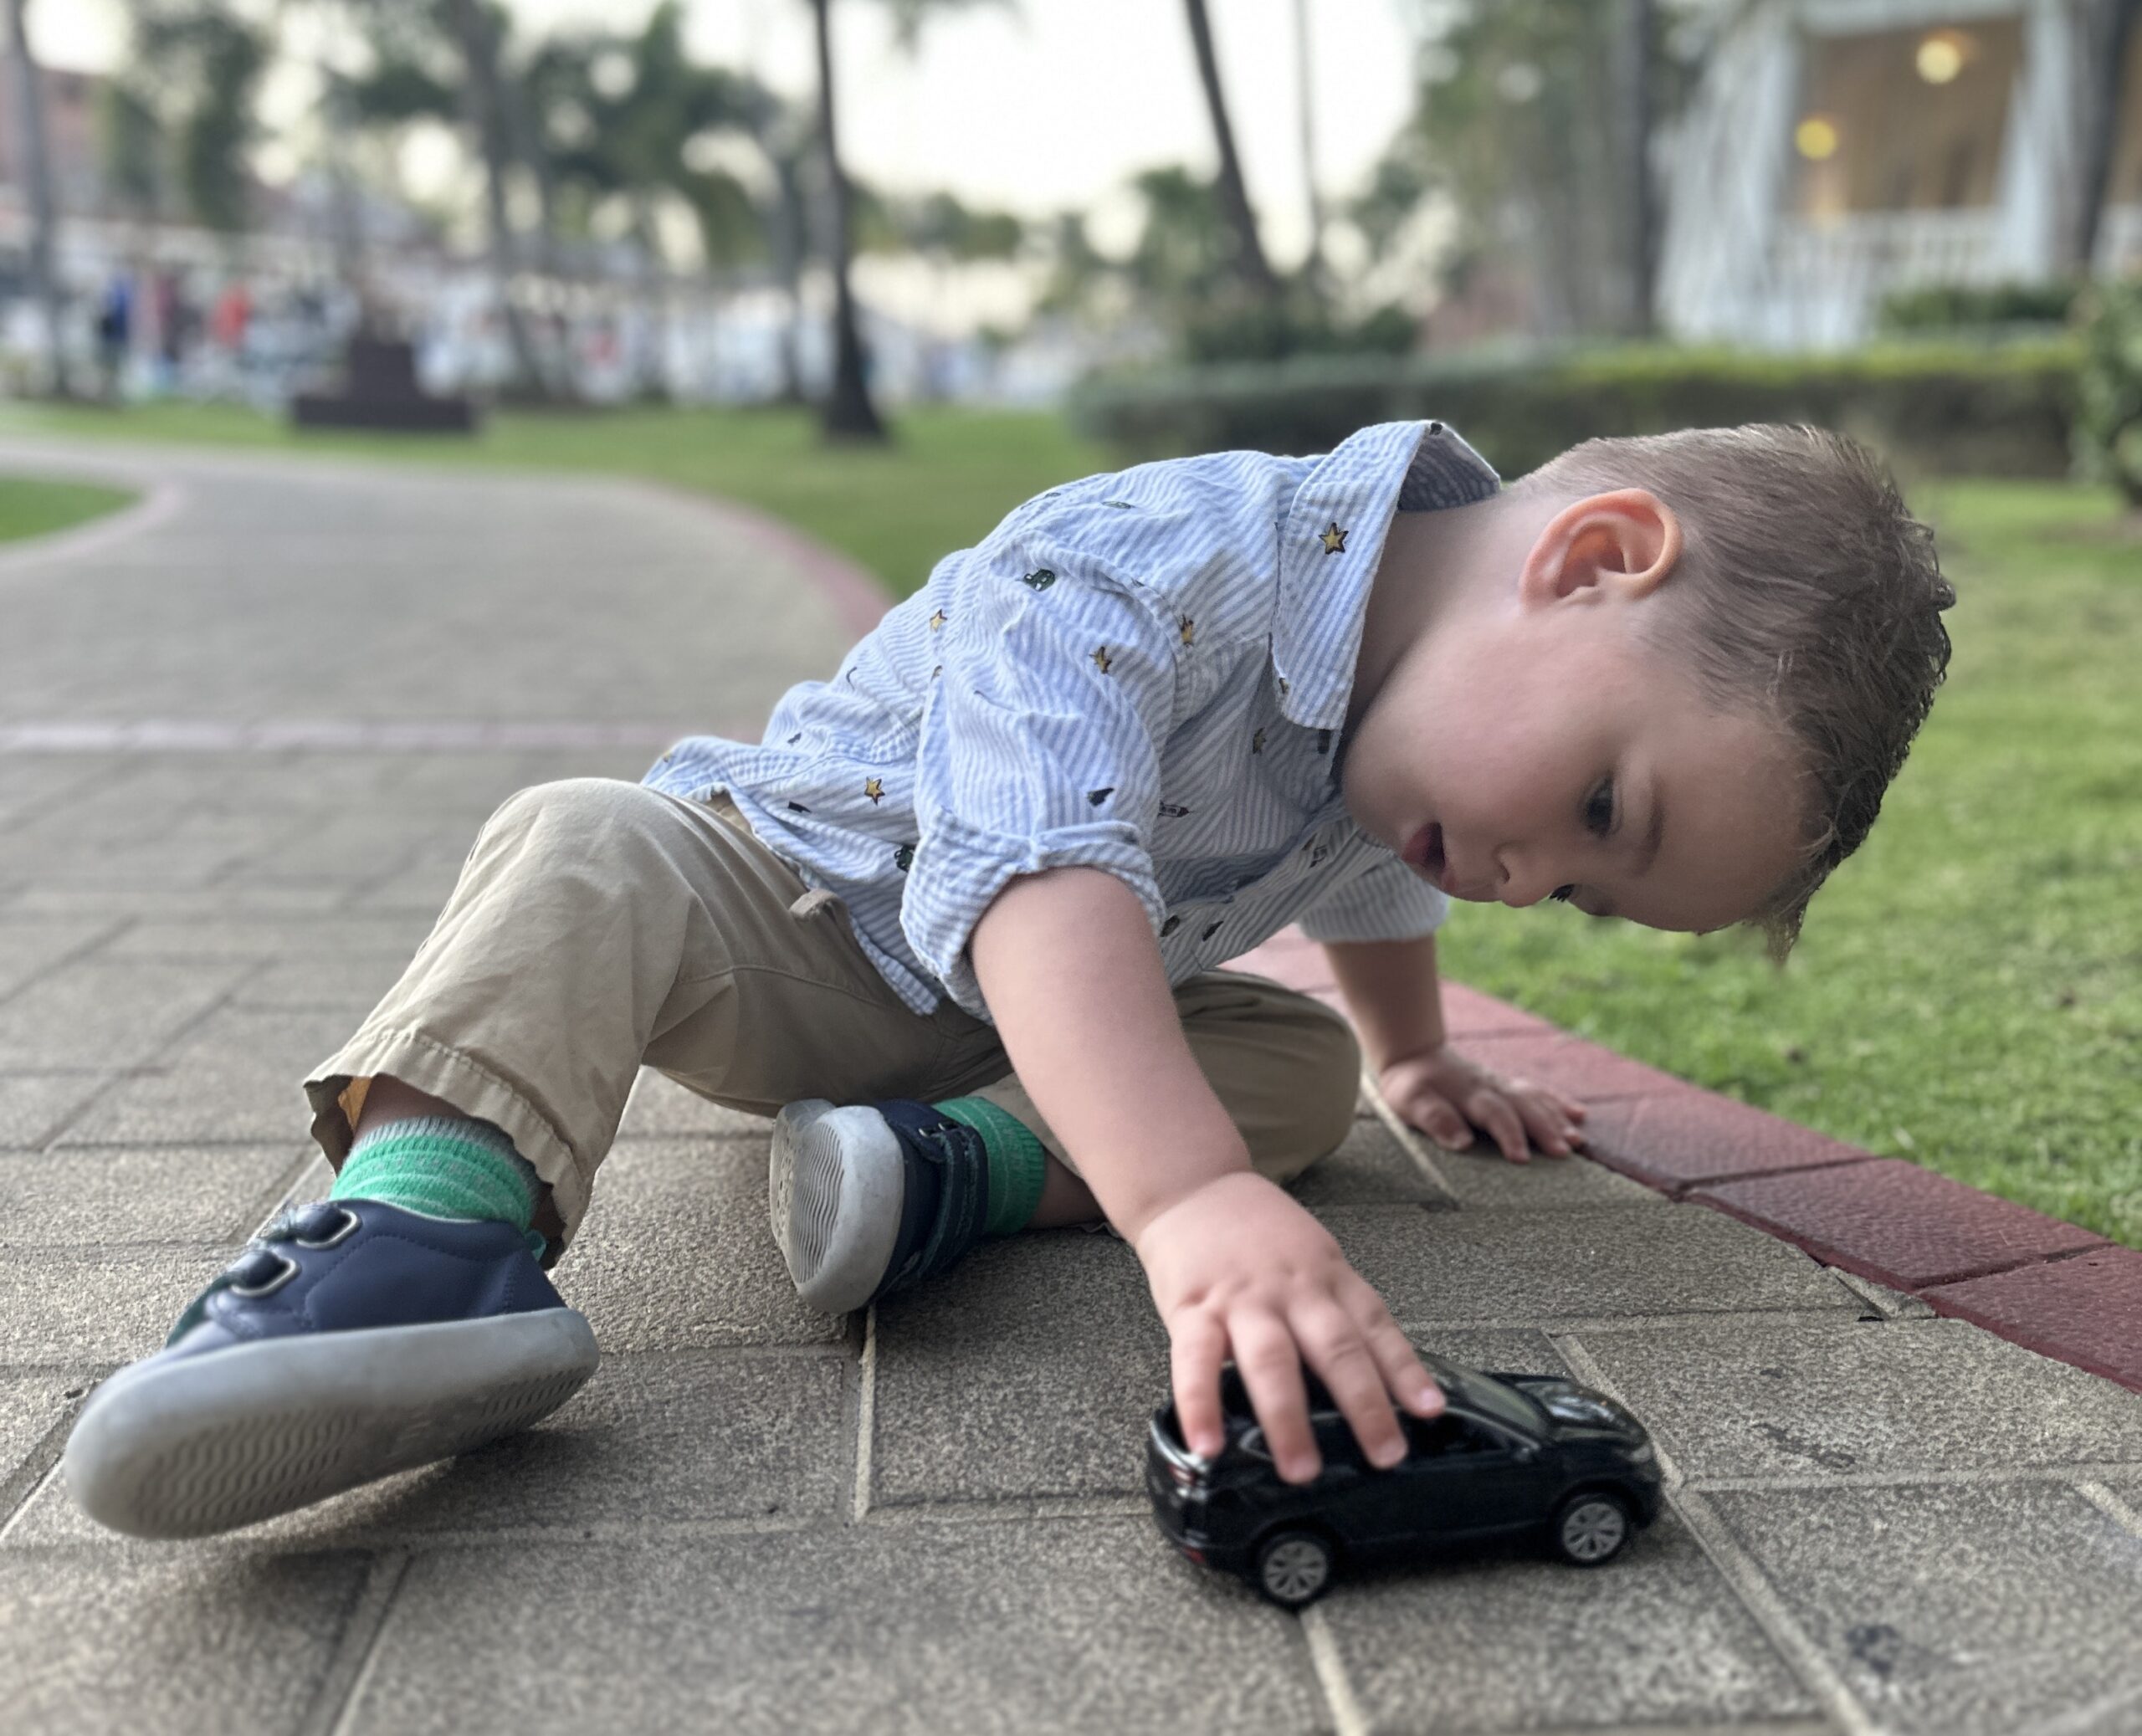 Child playing with a car wearing nice clothing at a resort in Jamaica